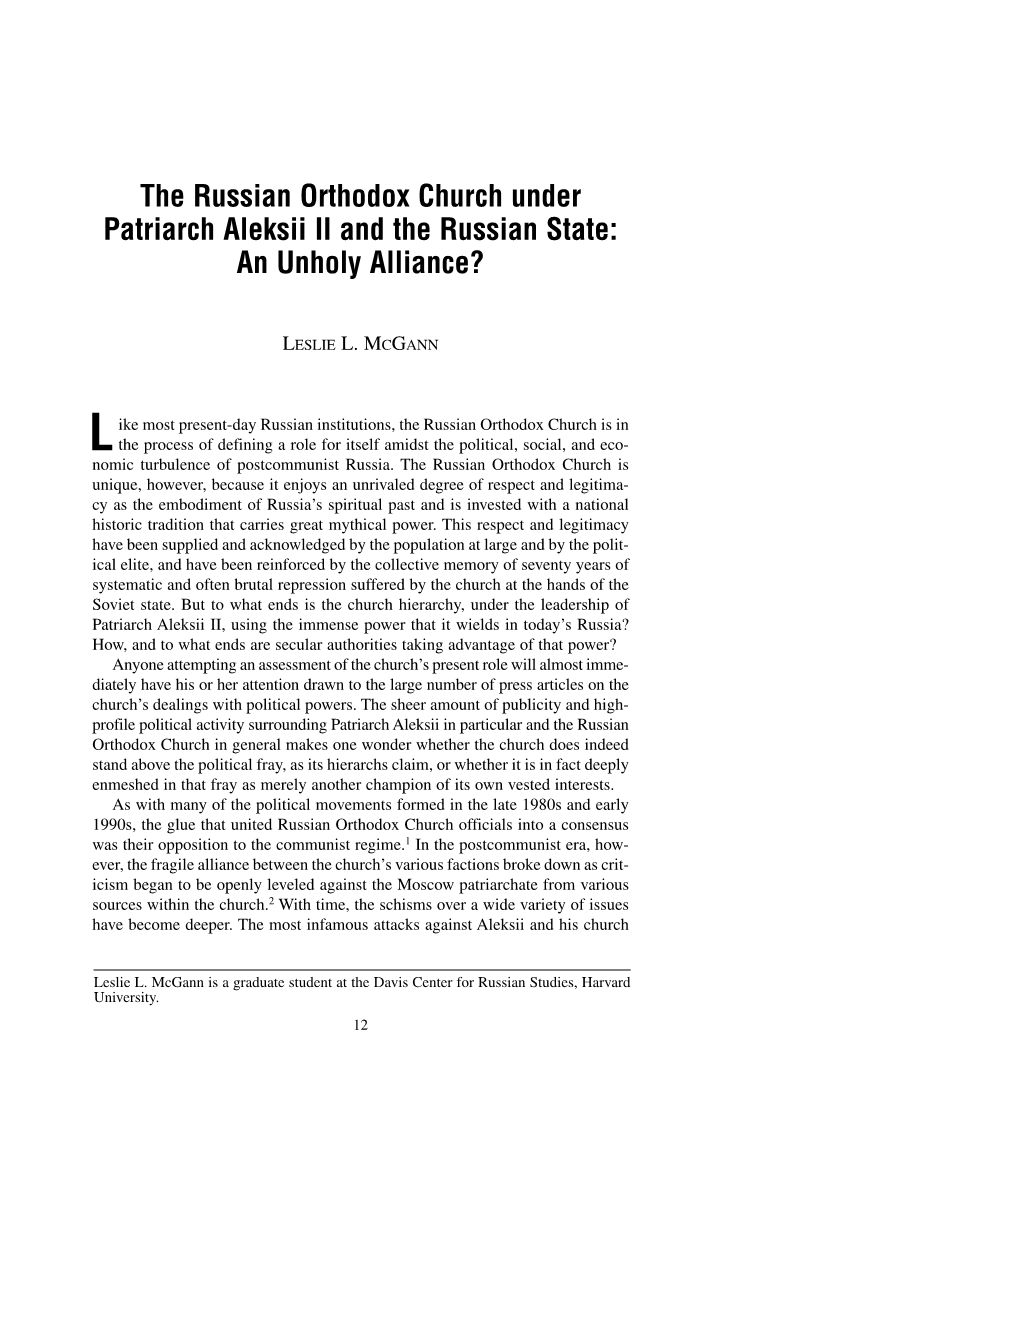 The Russian Orthodox Church Under Patriarch Aleksii II and the Russian State: an Unholy Alliance?